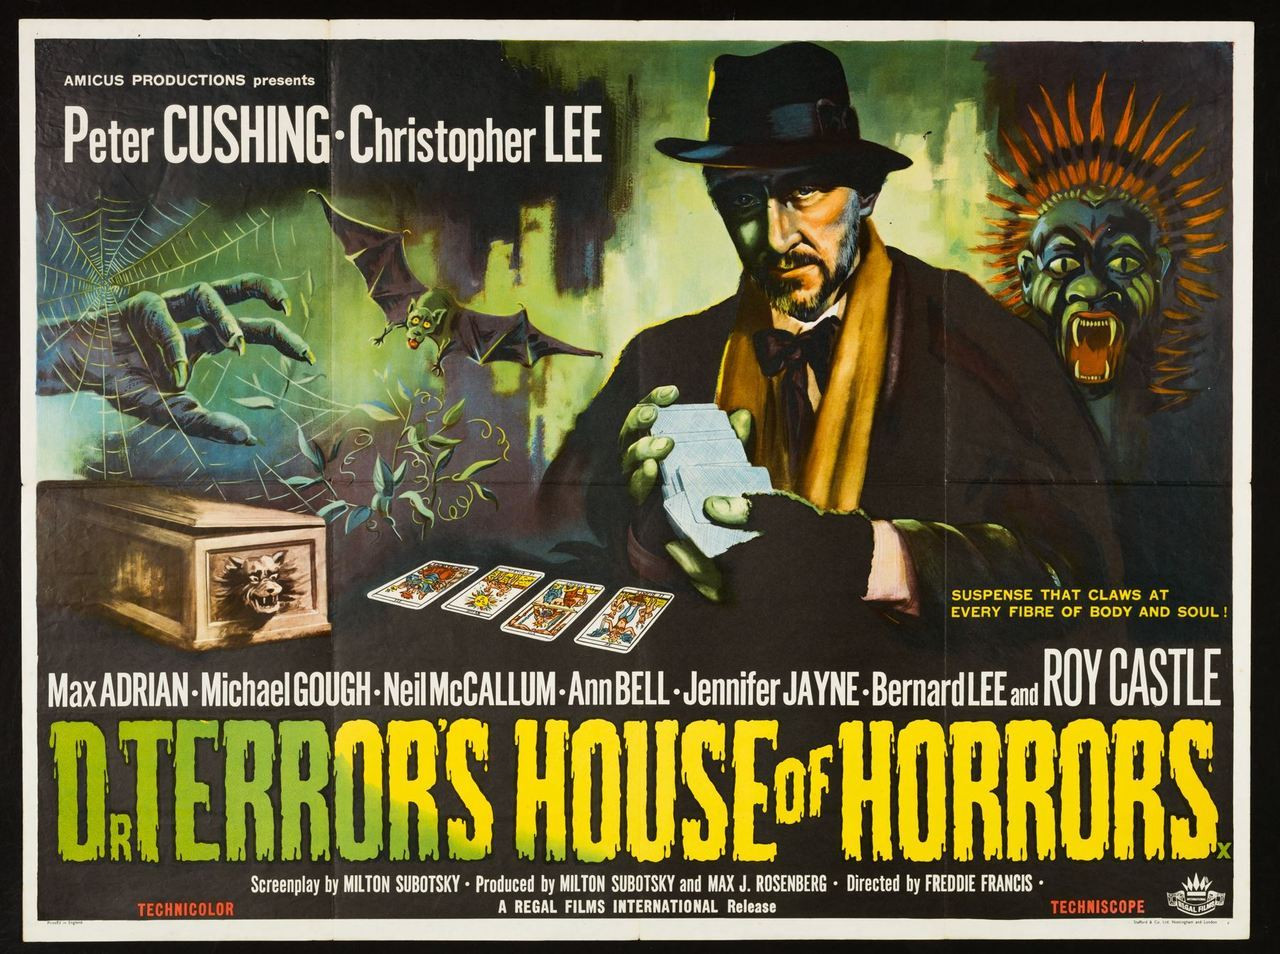 [Image: Dr.-Terrors-House-of-Horrors2575ceb949319a7d.jpg]